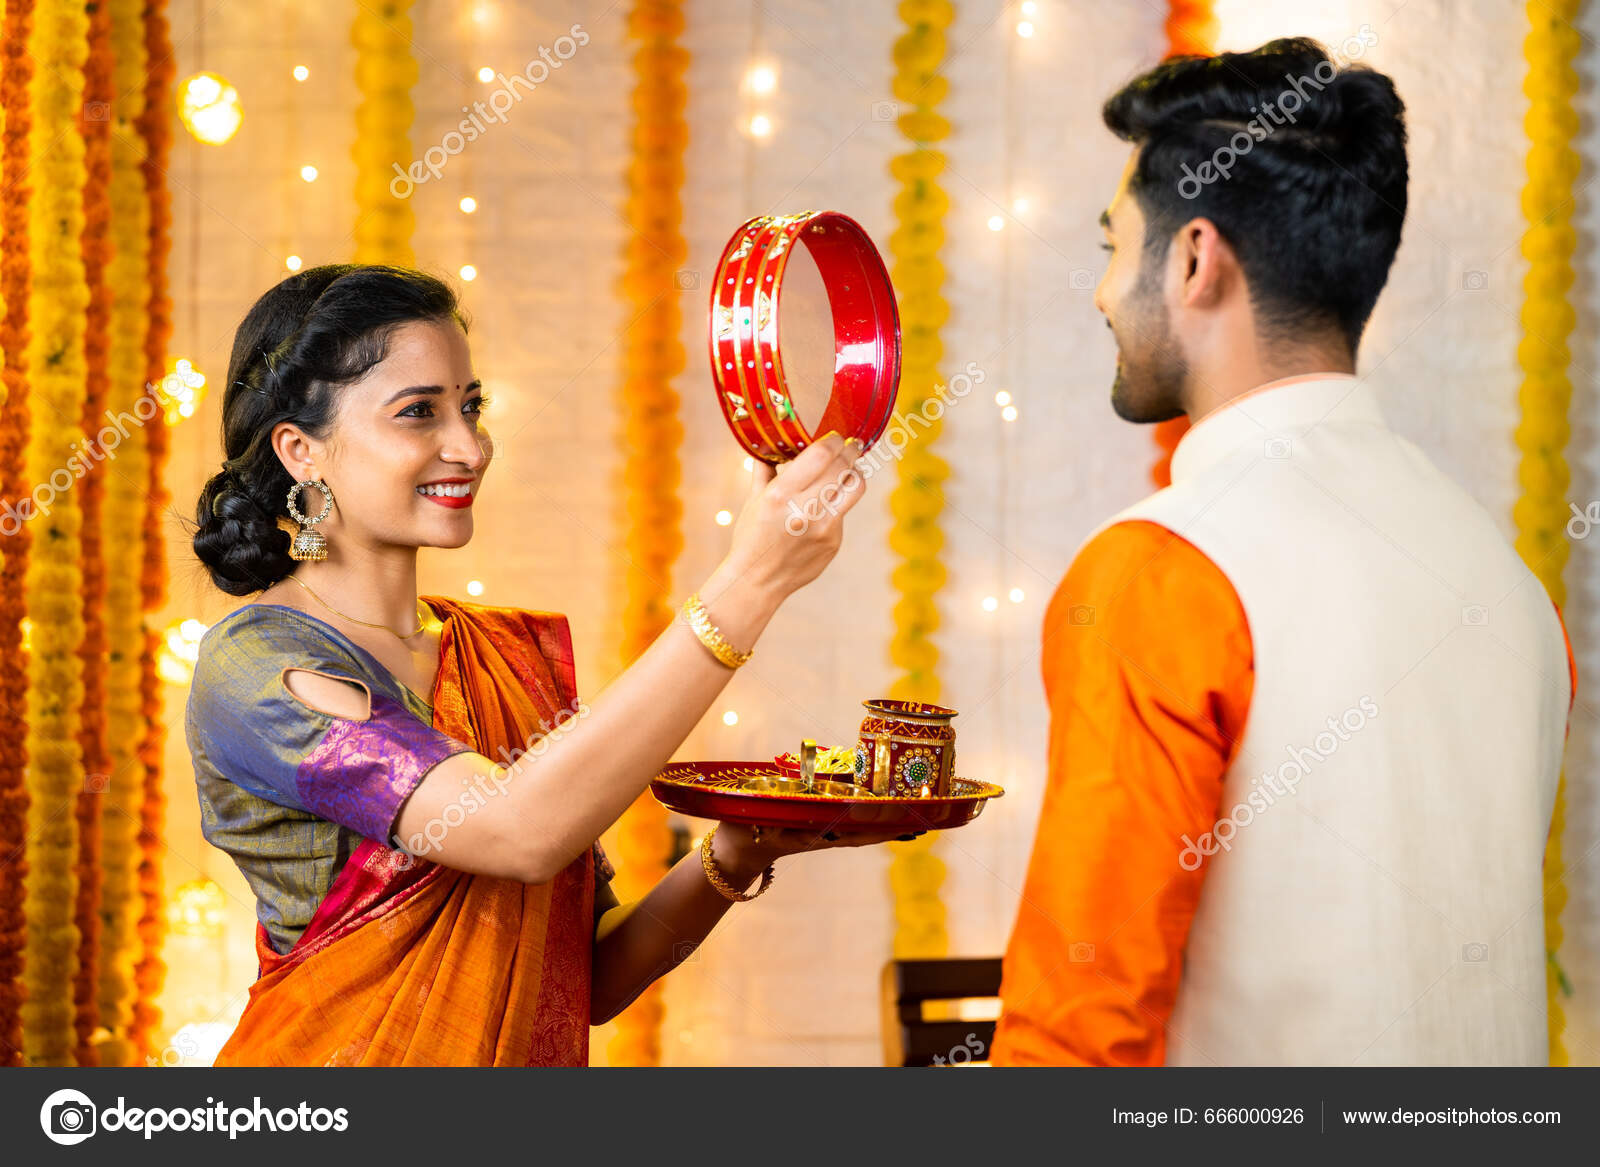 Wishing all the beautiful women a very Happy Karva Chauth 2019… | Karwa  chauth pics, Happy karwa chauth images, Karwa chauth images